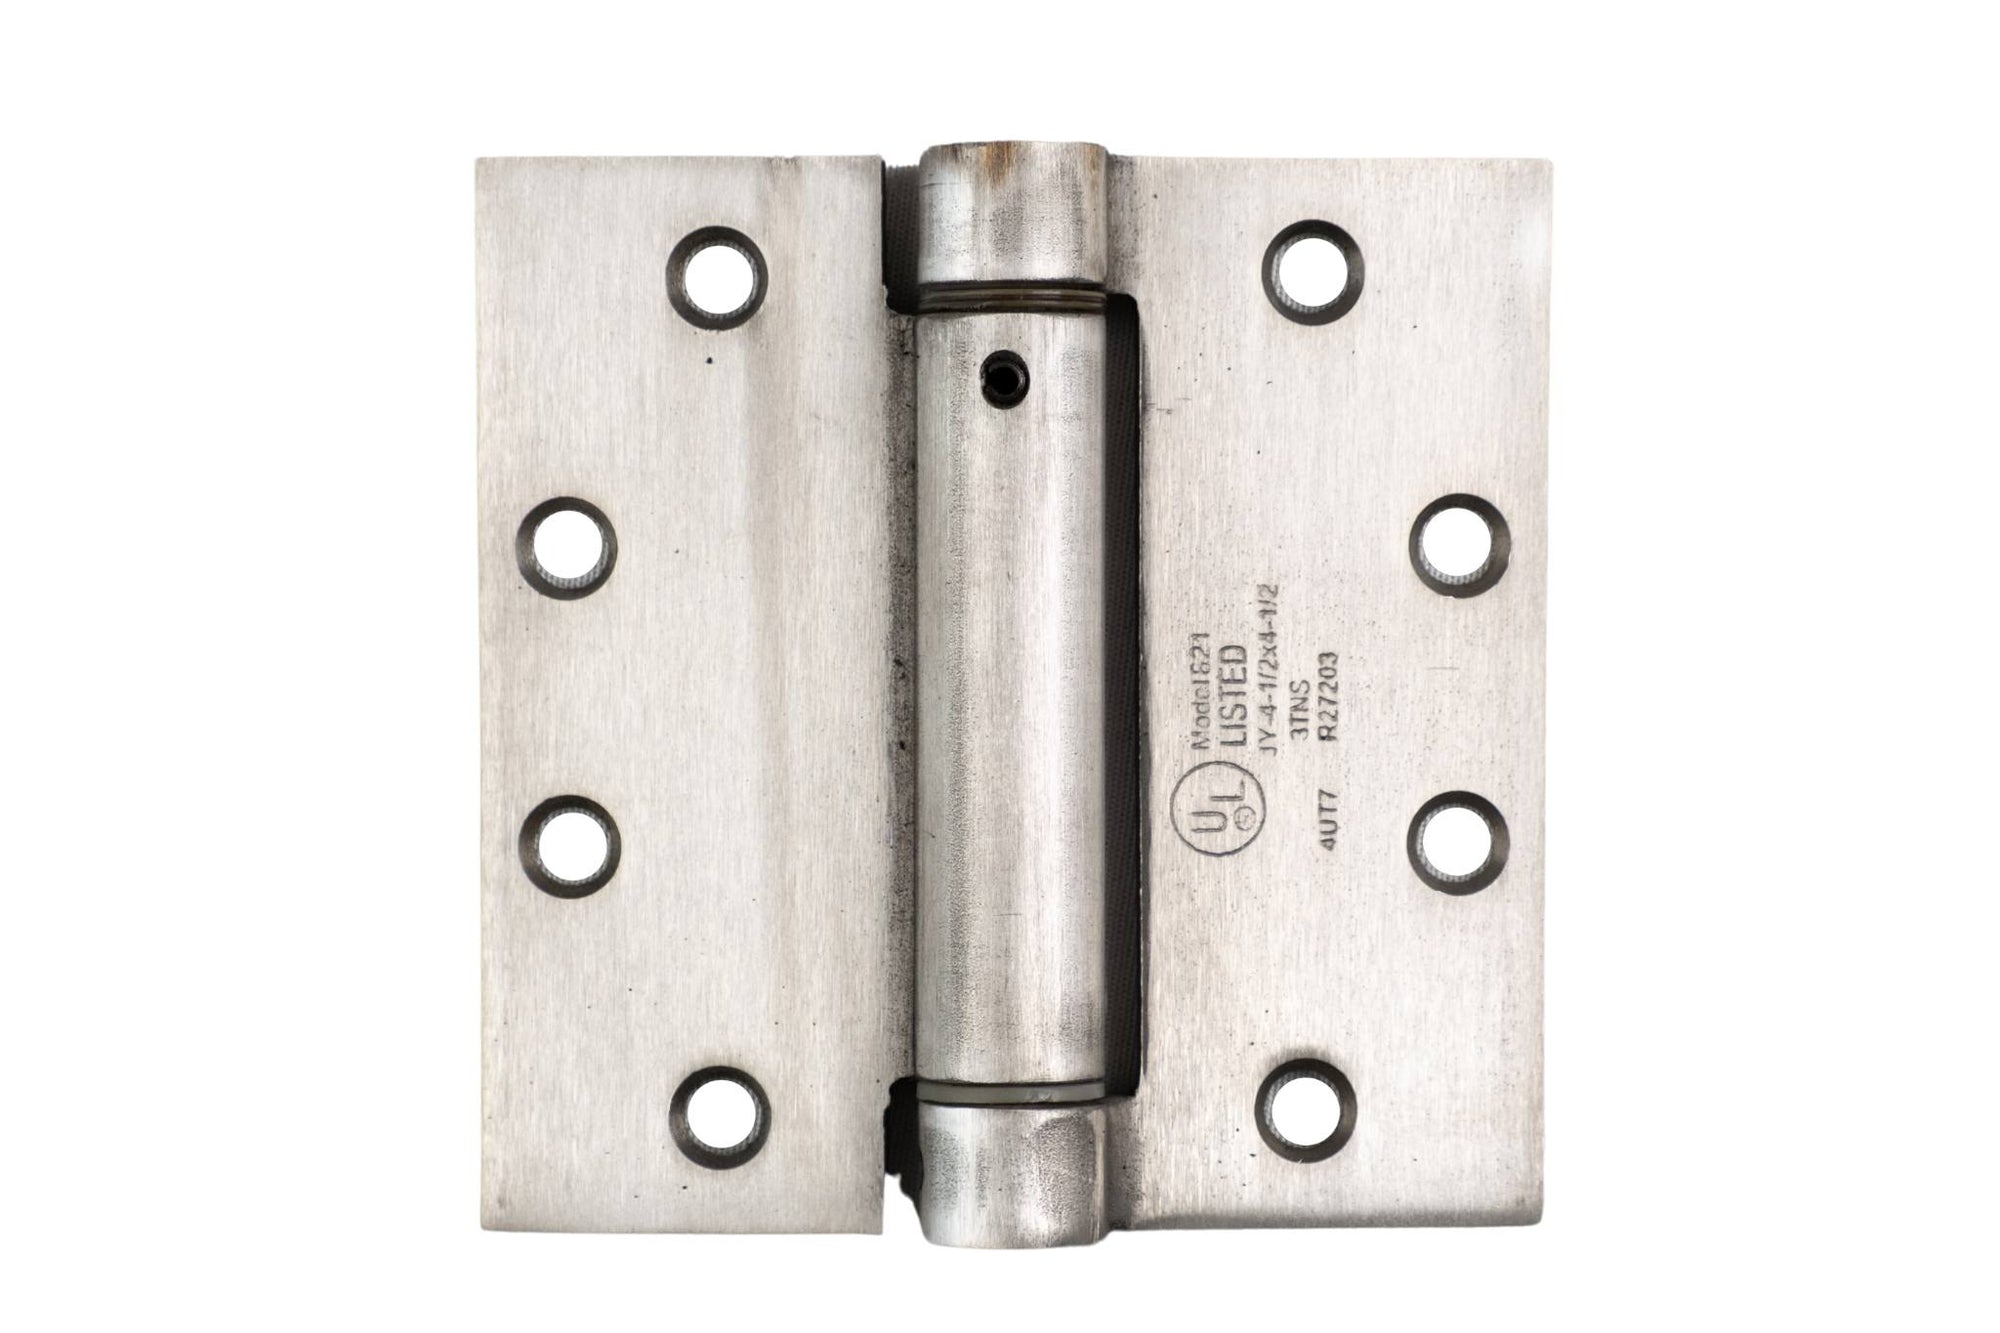 316 Grade Commercial Stainless Steel Spring Hinges - 4 1/2" Square - 2 Pack